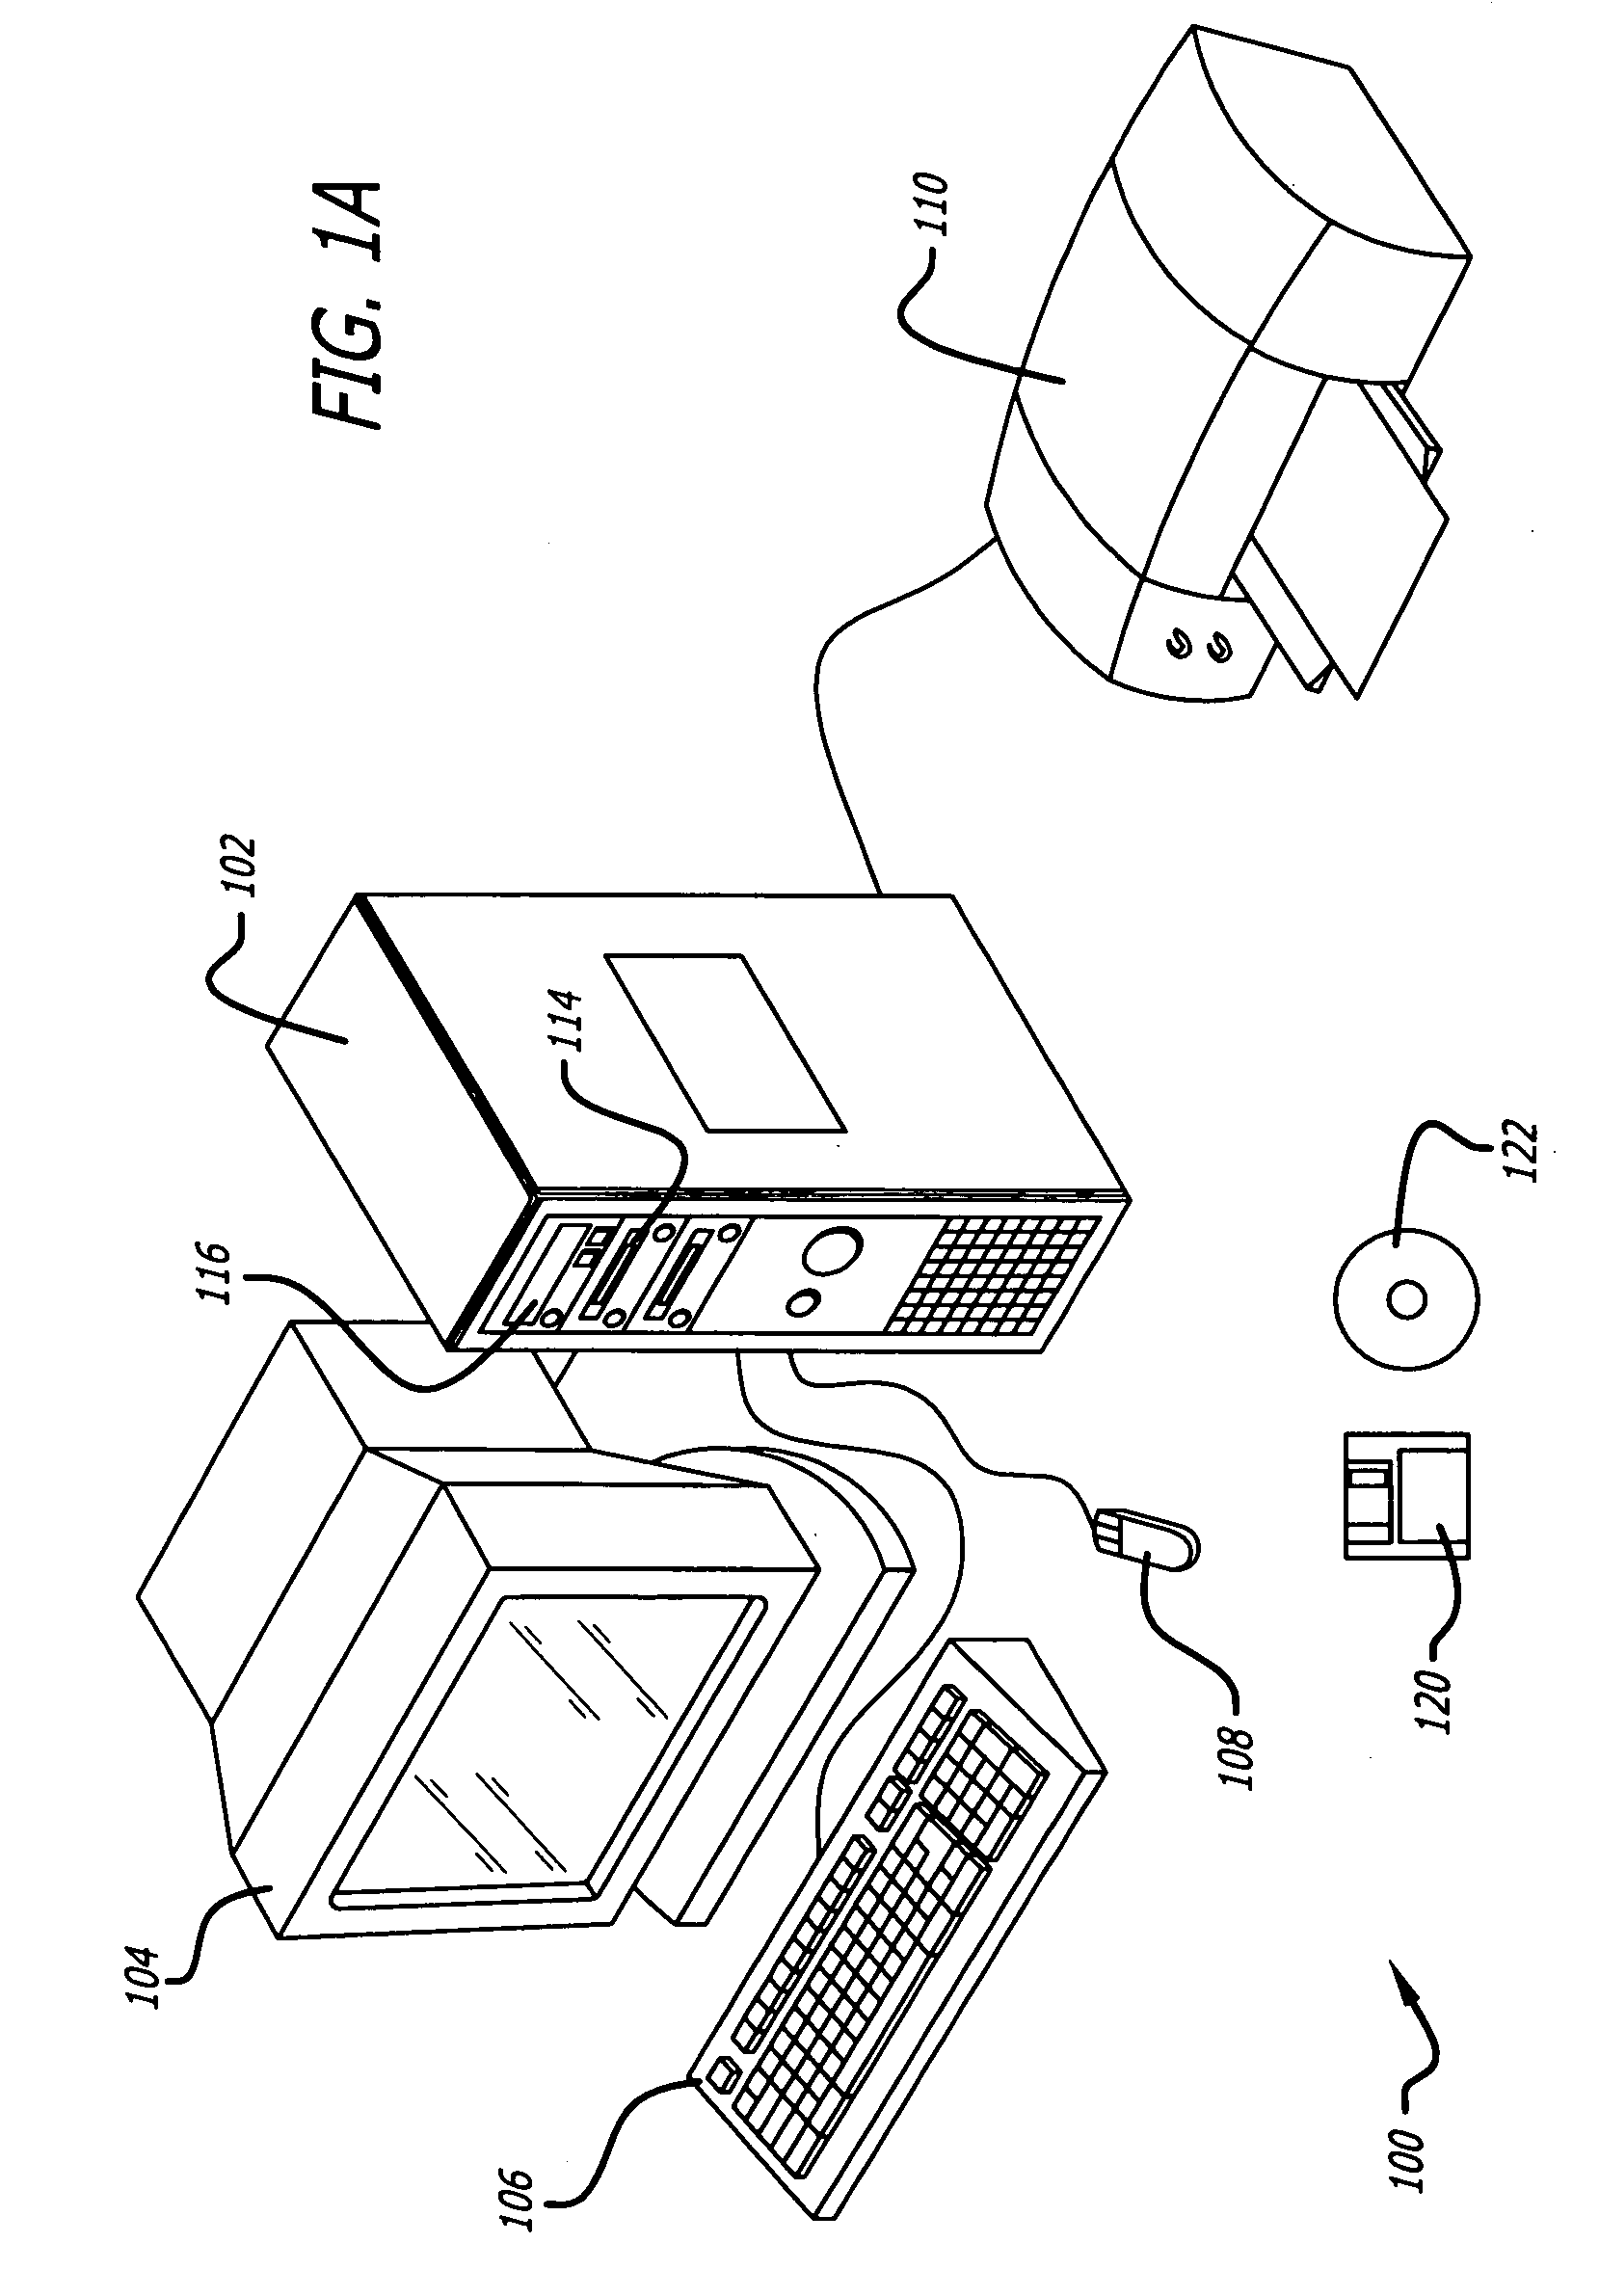 System and method of providing additional circuit analysis using simulation templates